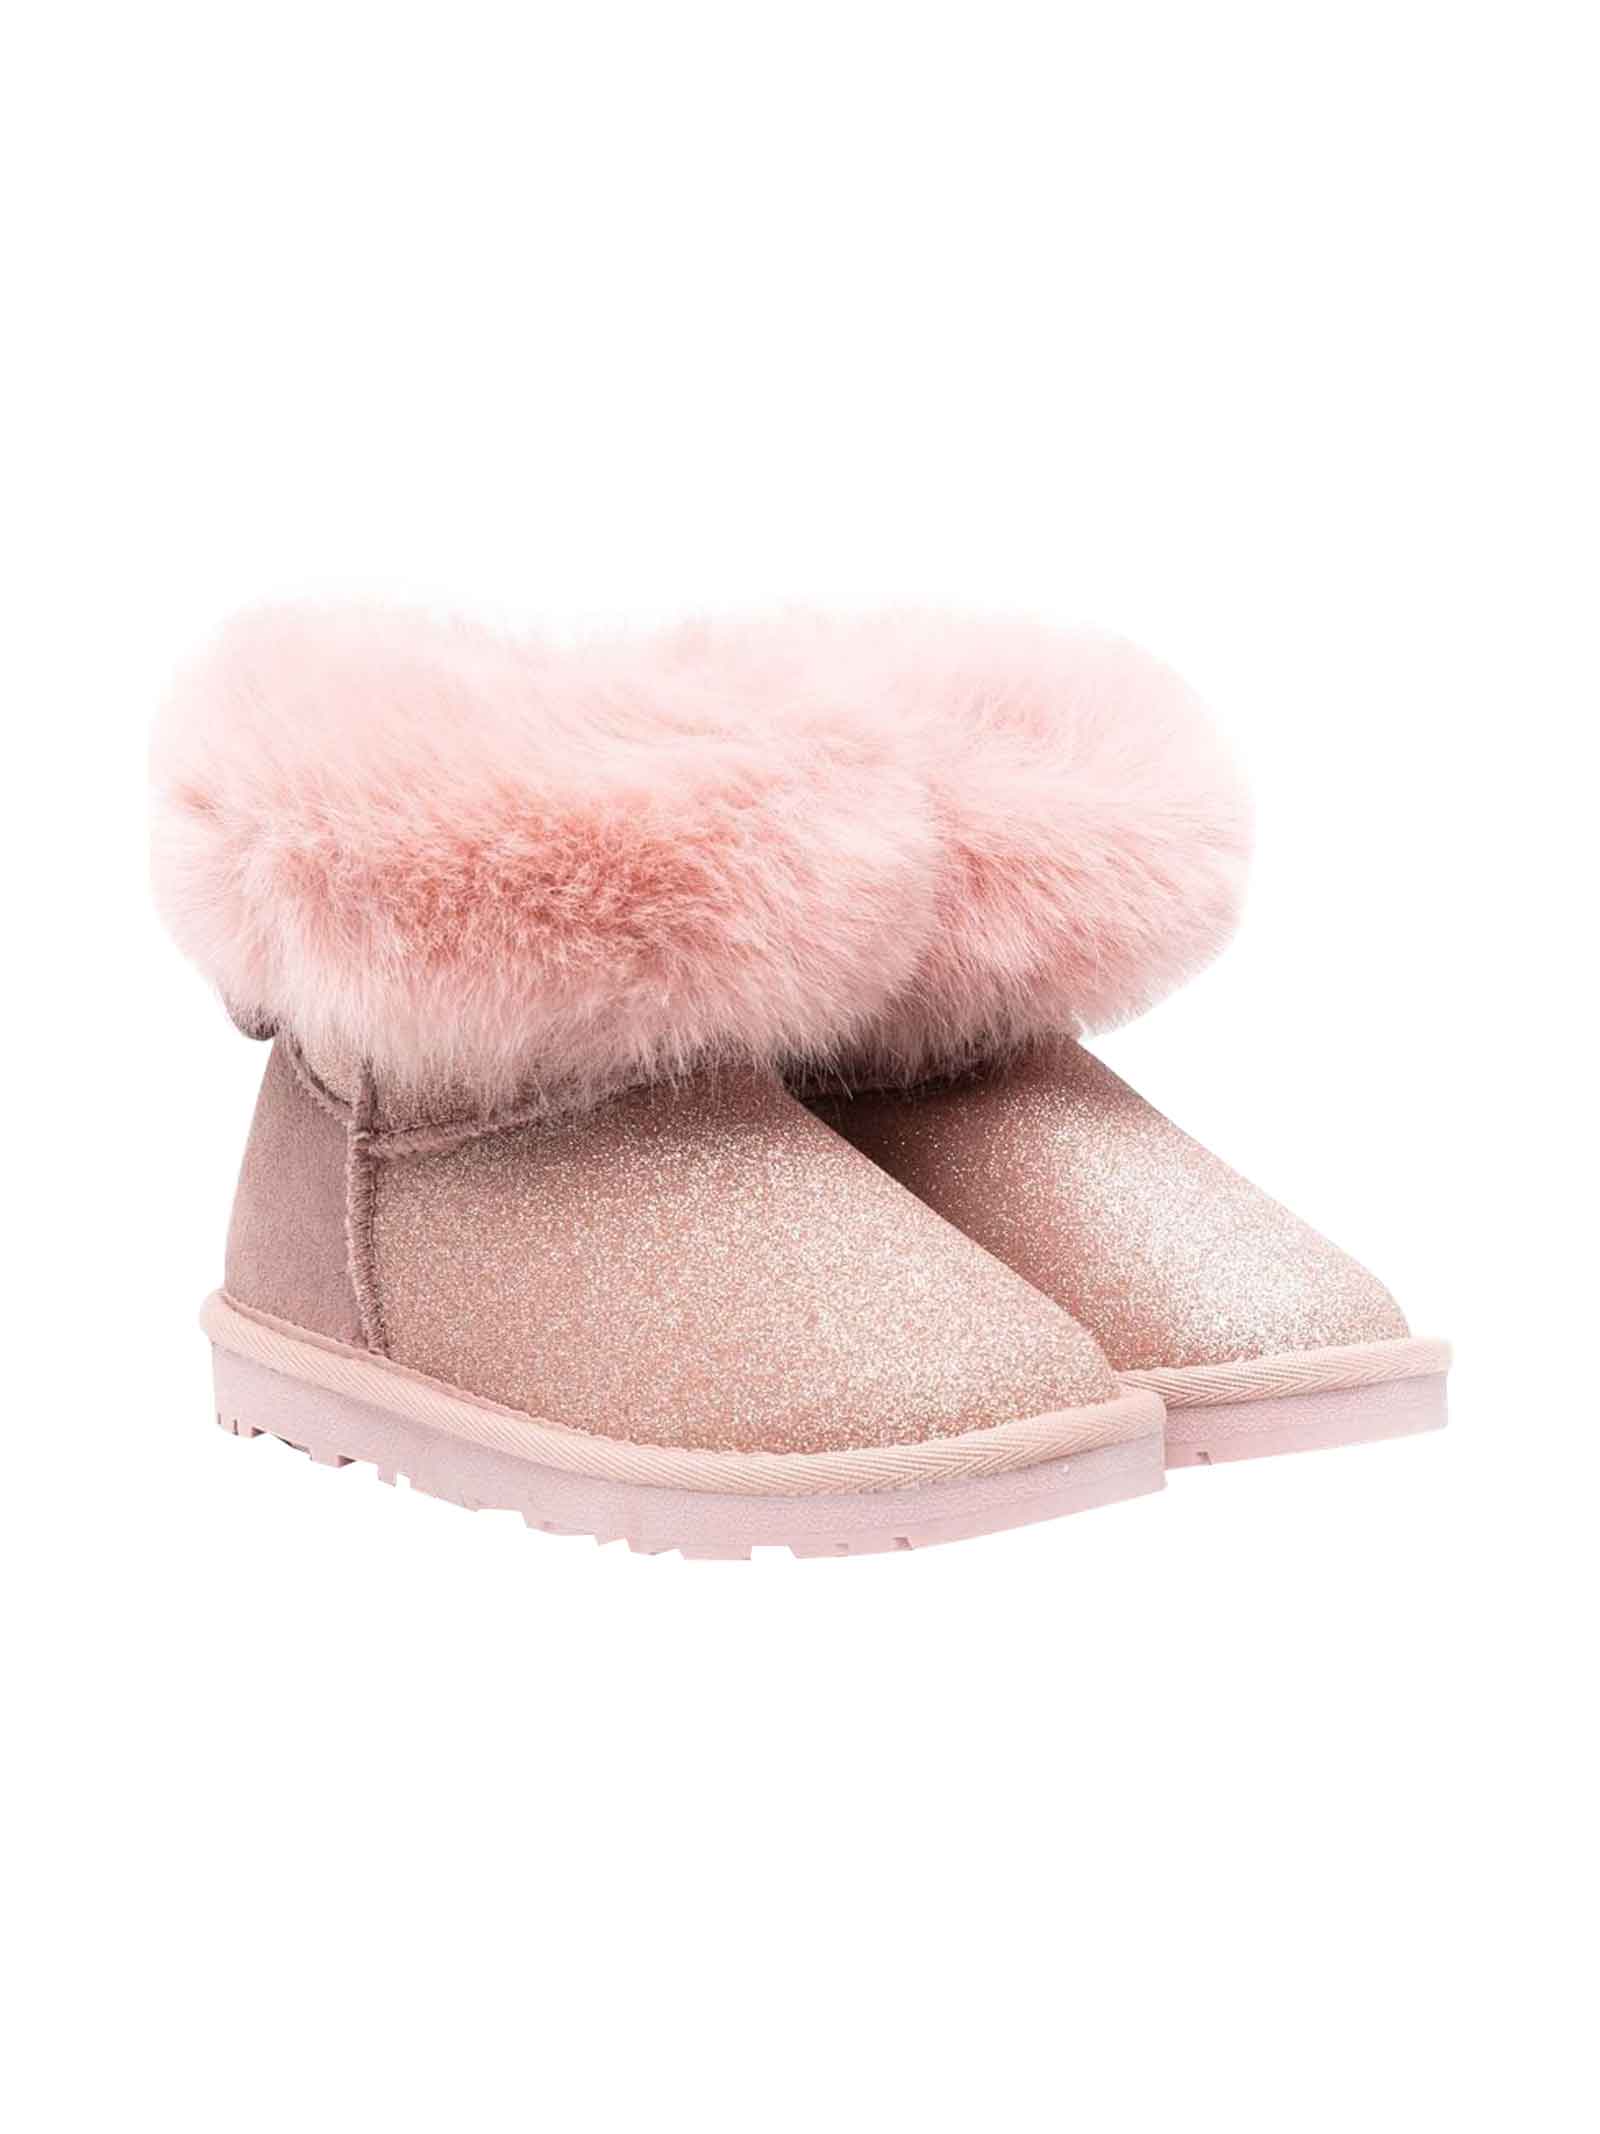 Monnalisa Pink Ankle Boots